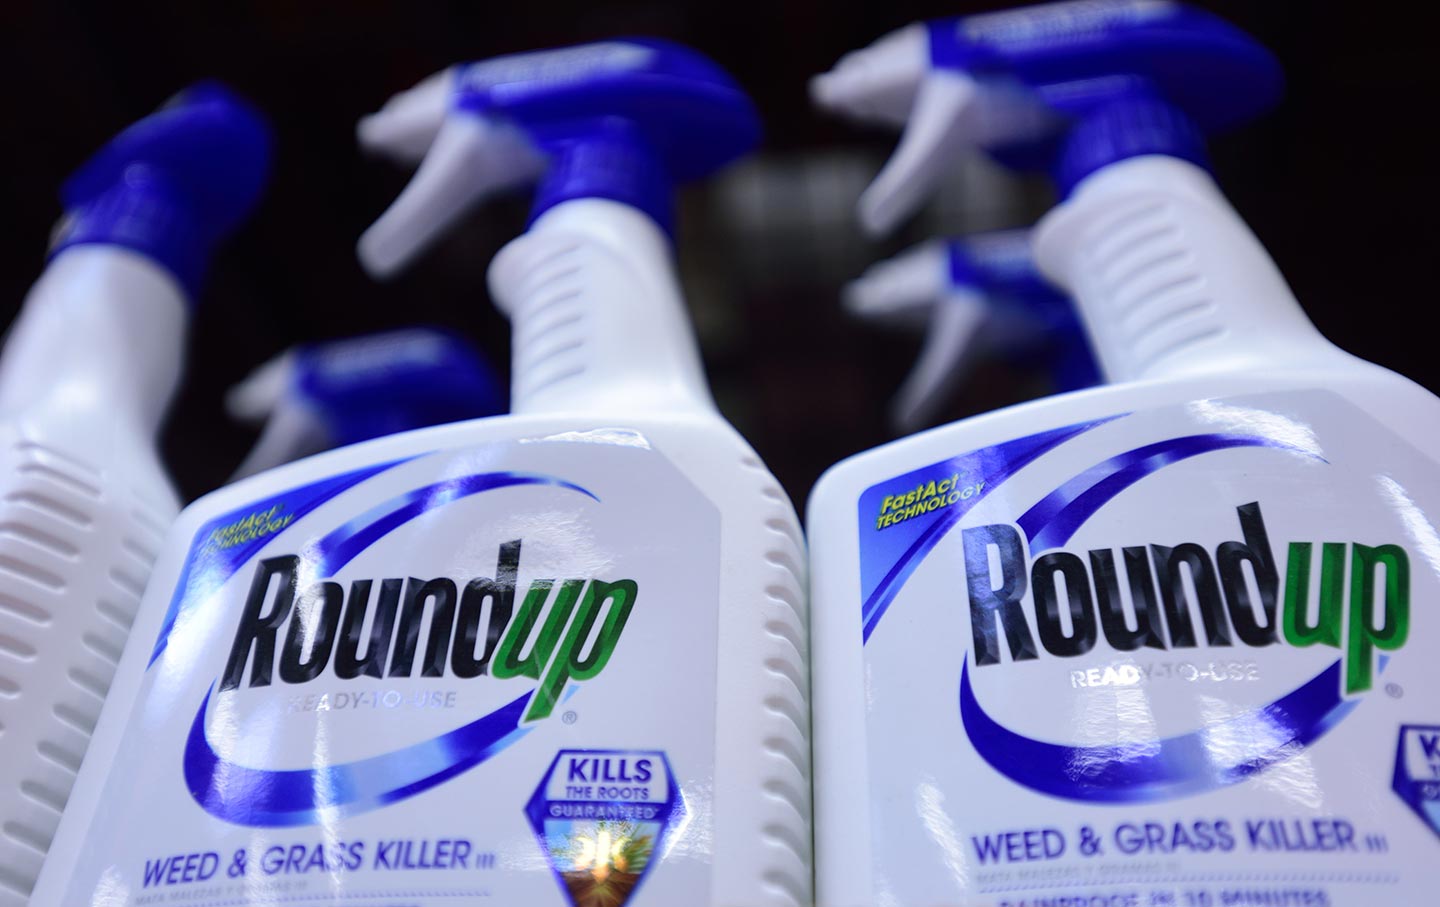 California says key ingredient in Roundup weed killer can cause cancer